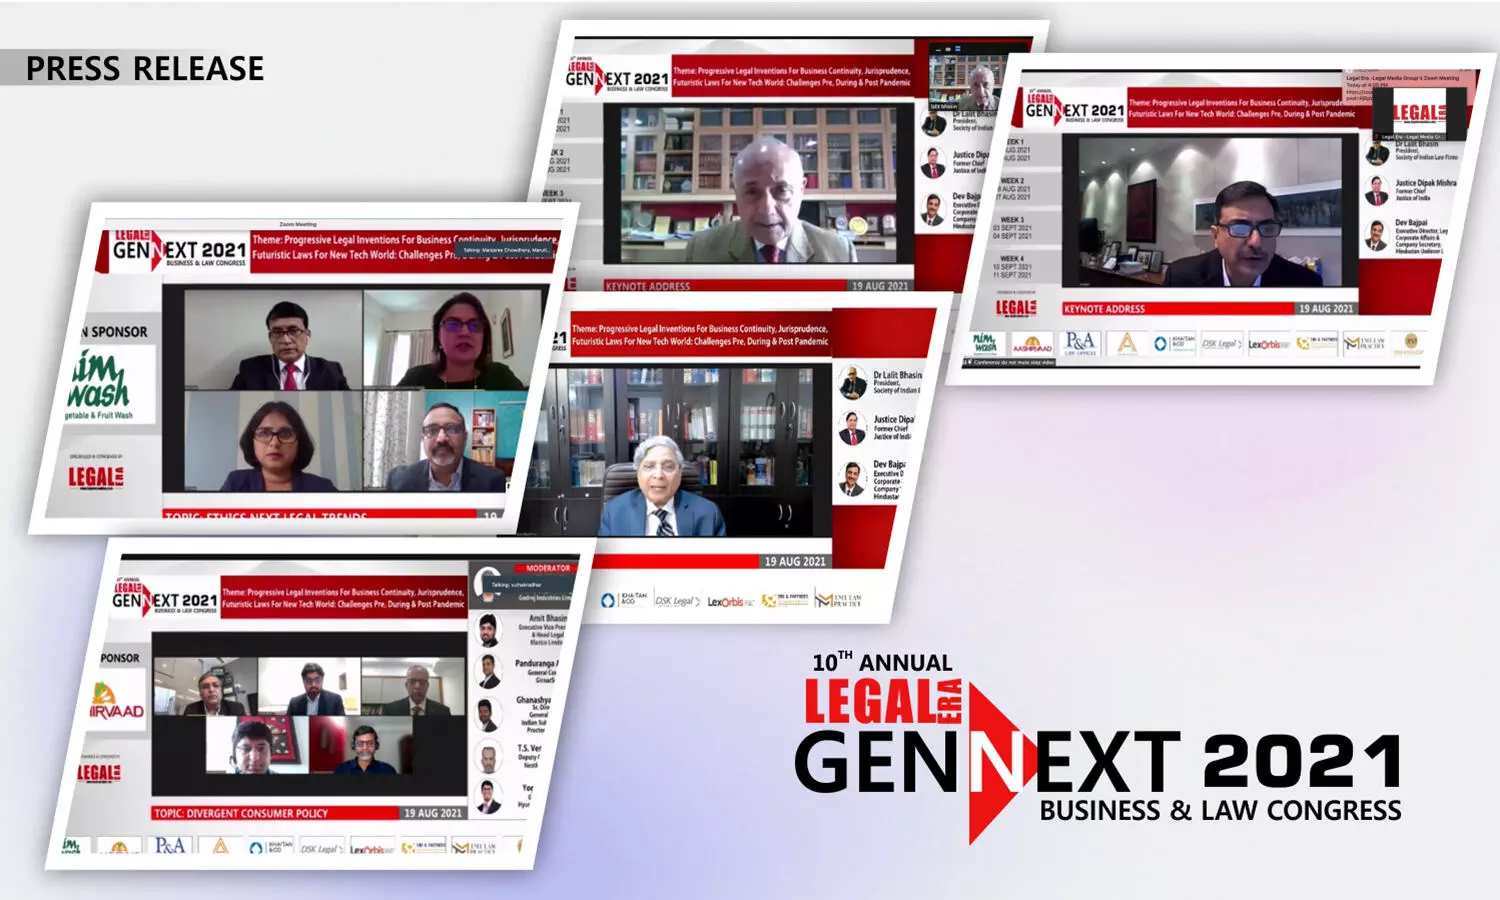 4 WEEKS Legal Era leads the way & captures the Next Big Business & Law Industry Trends at the GENNEXT 2021